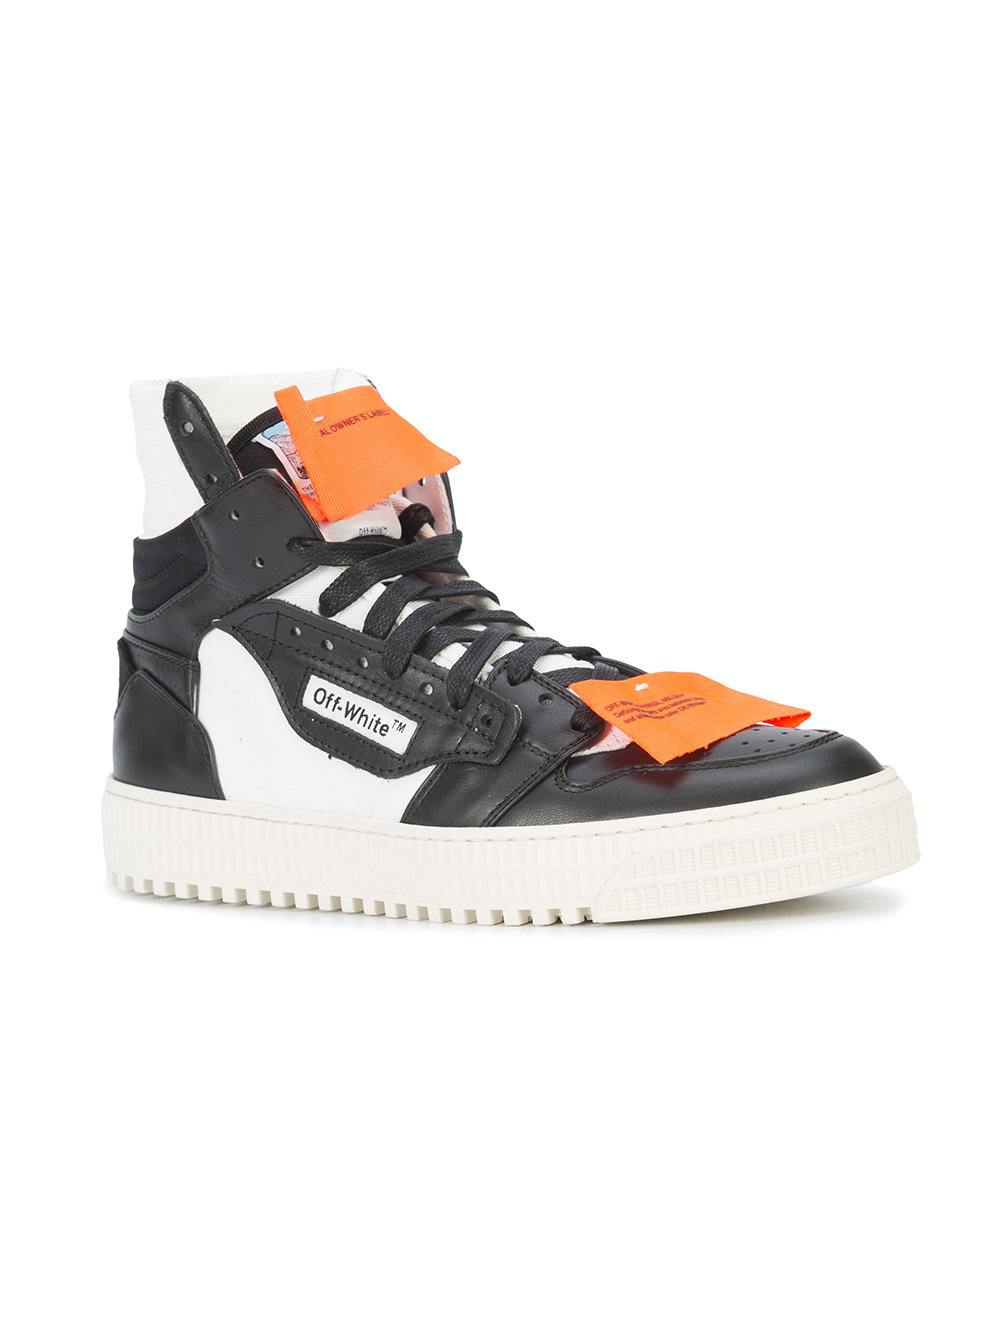 OFF-WHITE Hi-Top Sneakers // Available Now | Nice Kicks